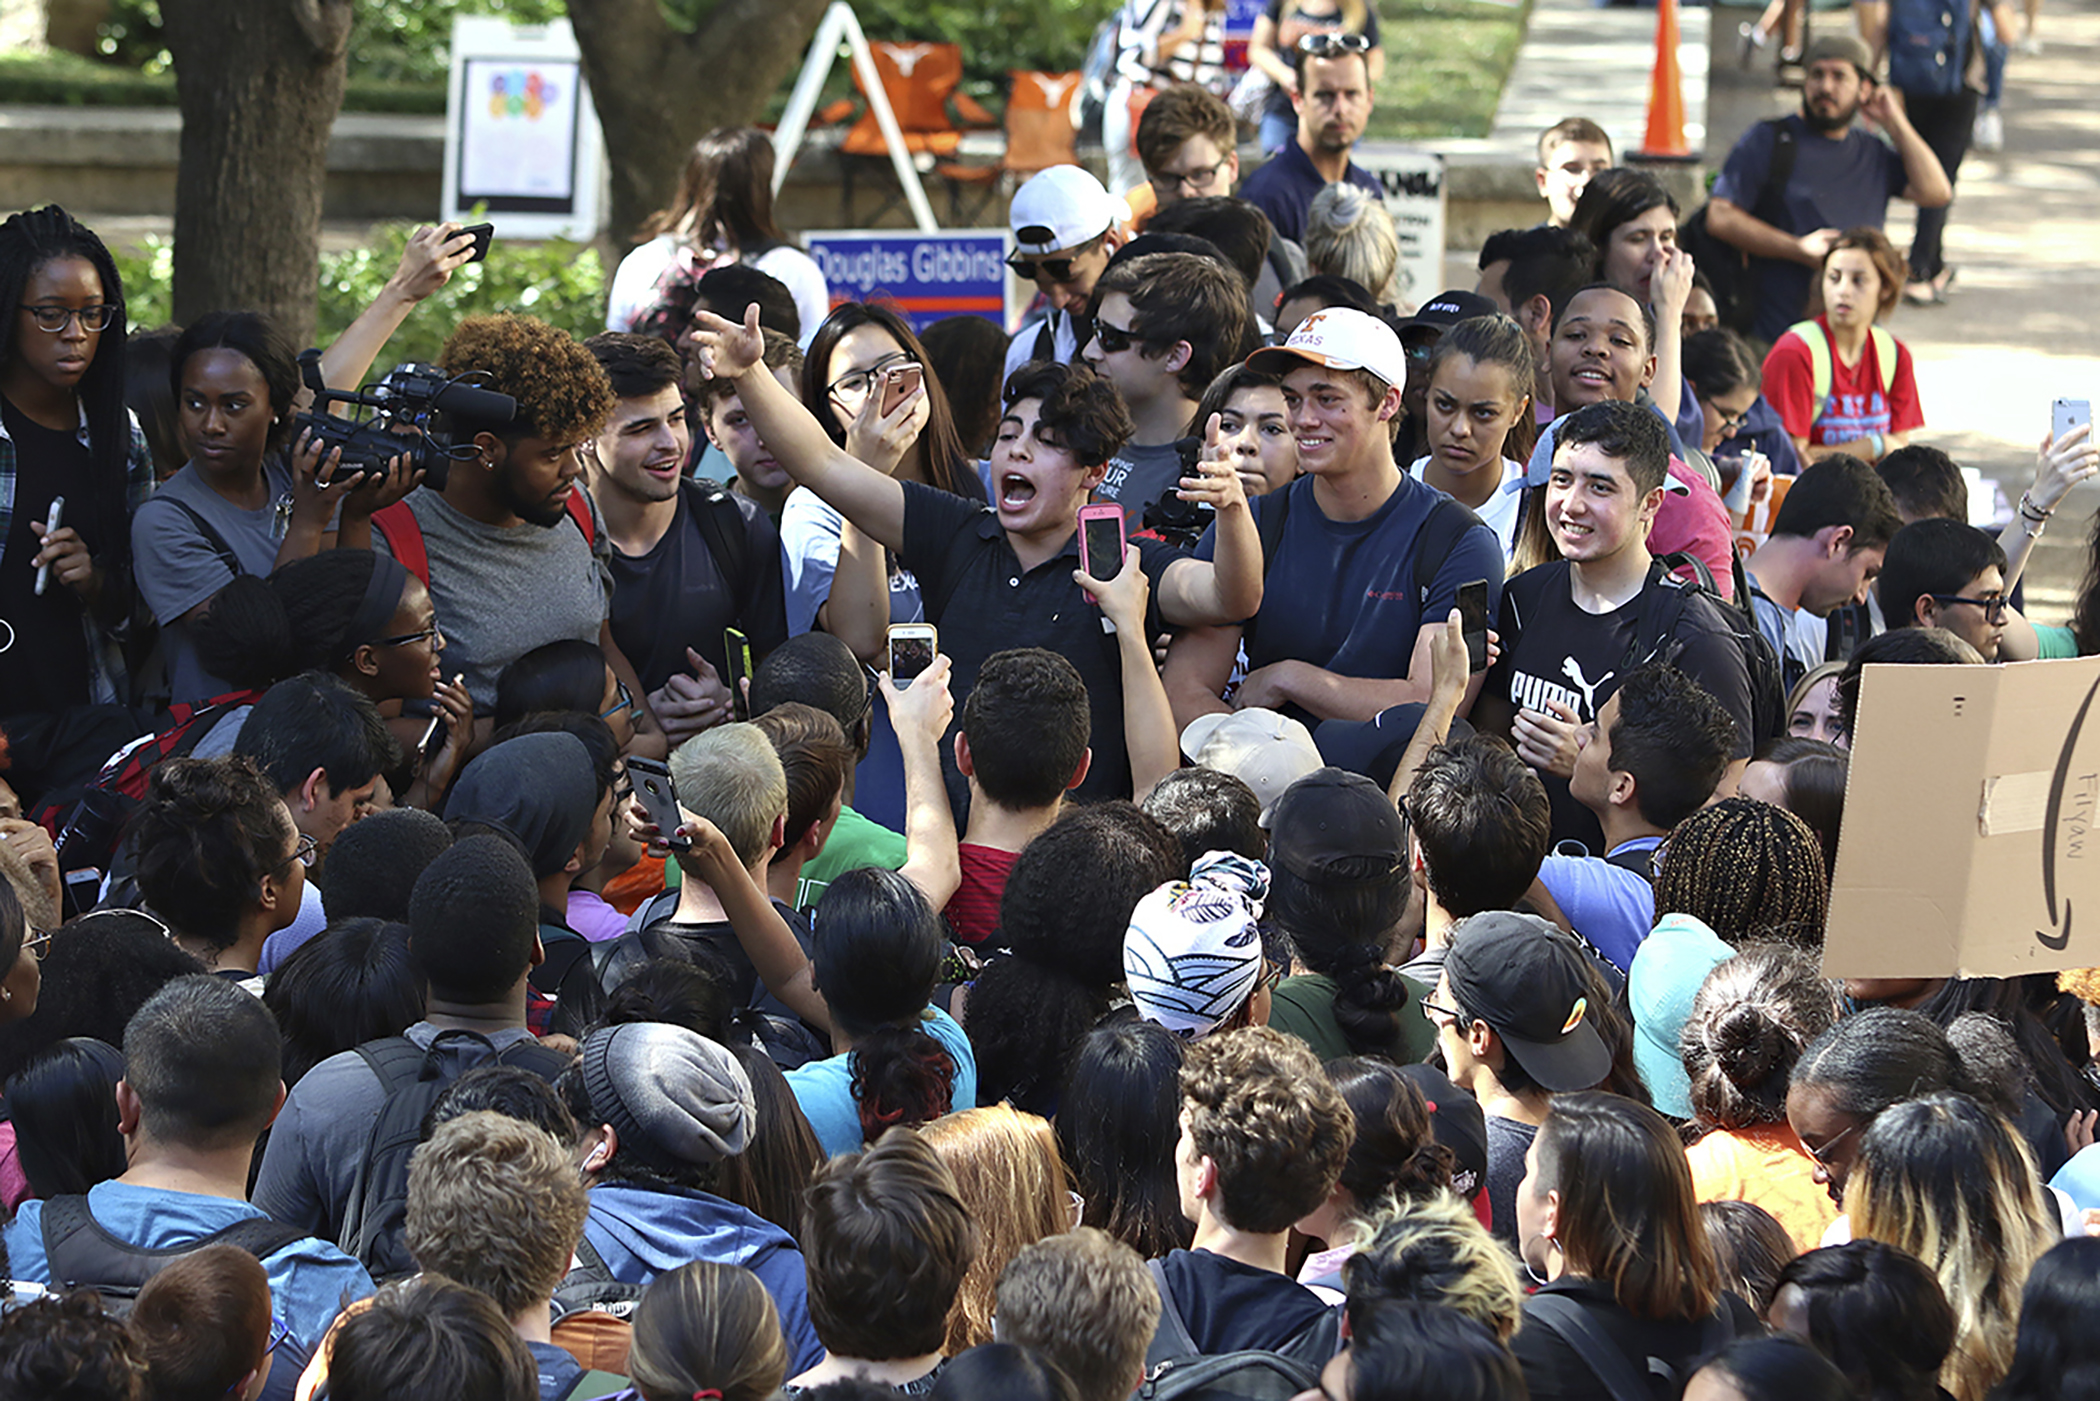 University of Texas Student Bake Sale Protests Affirmative Action